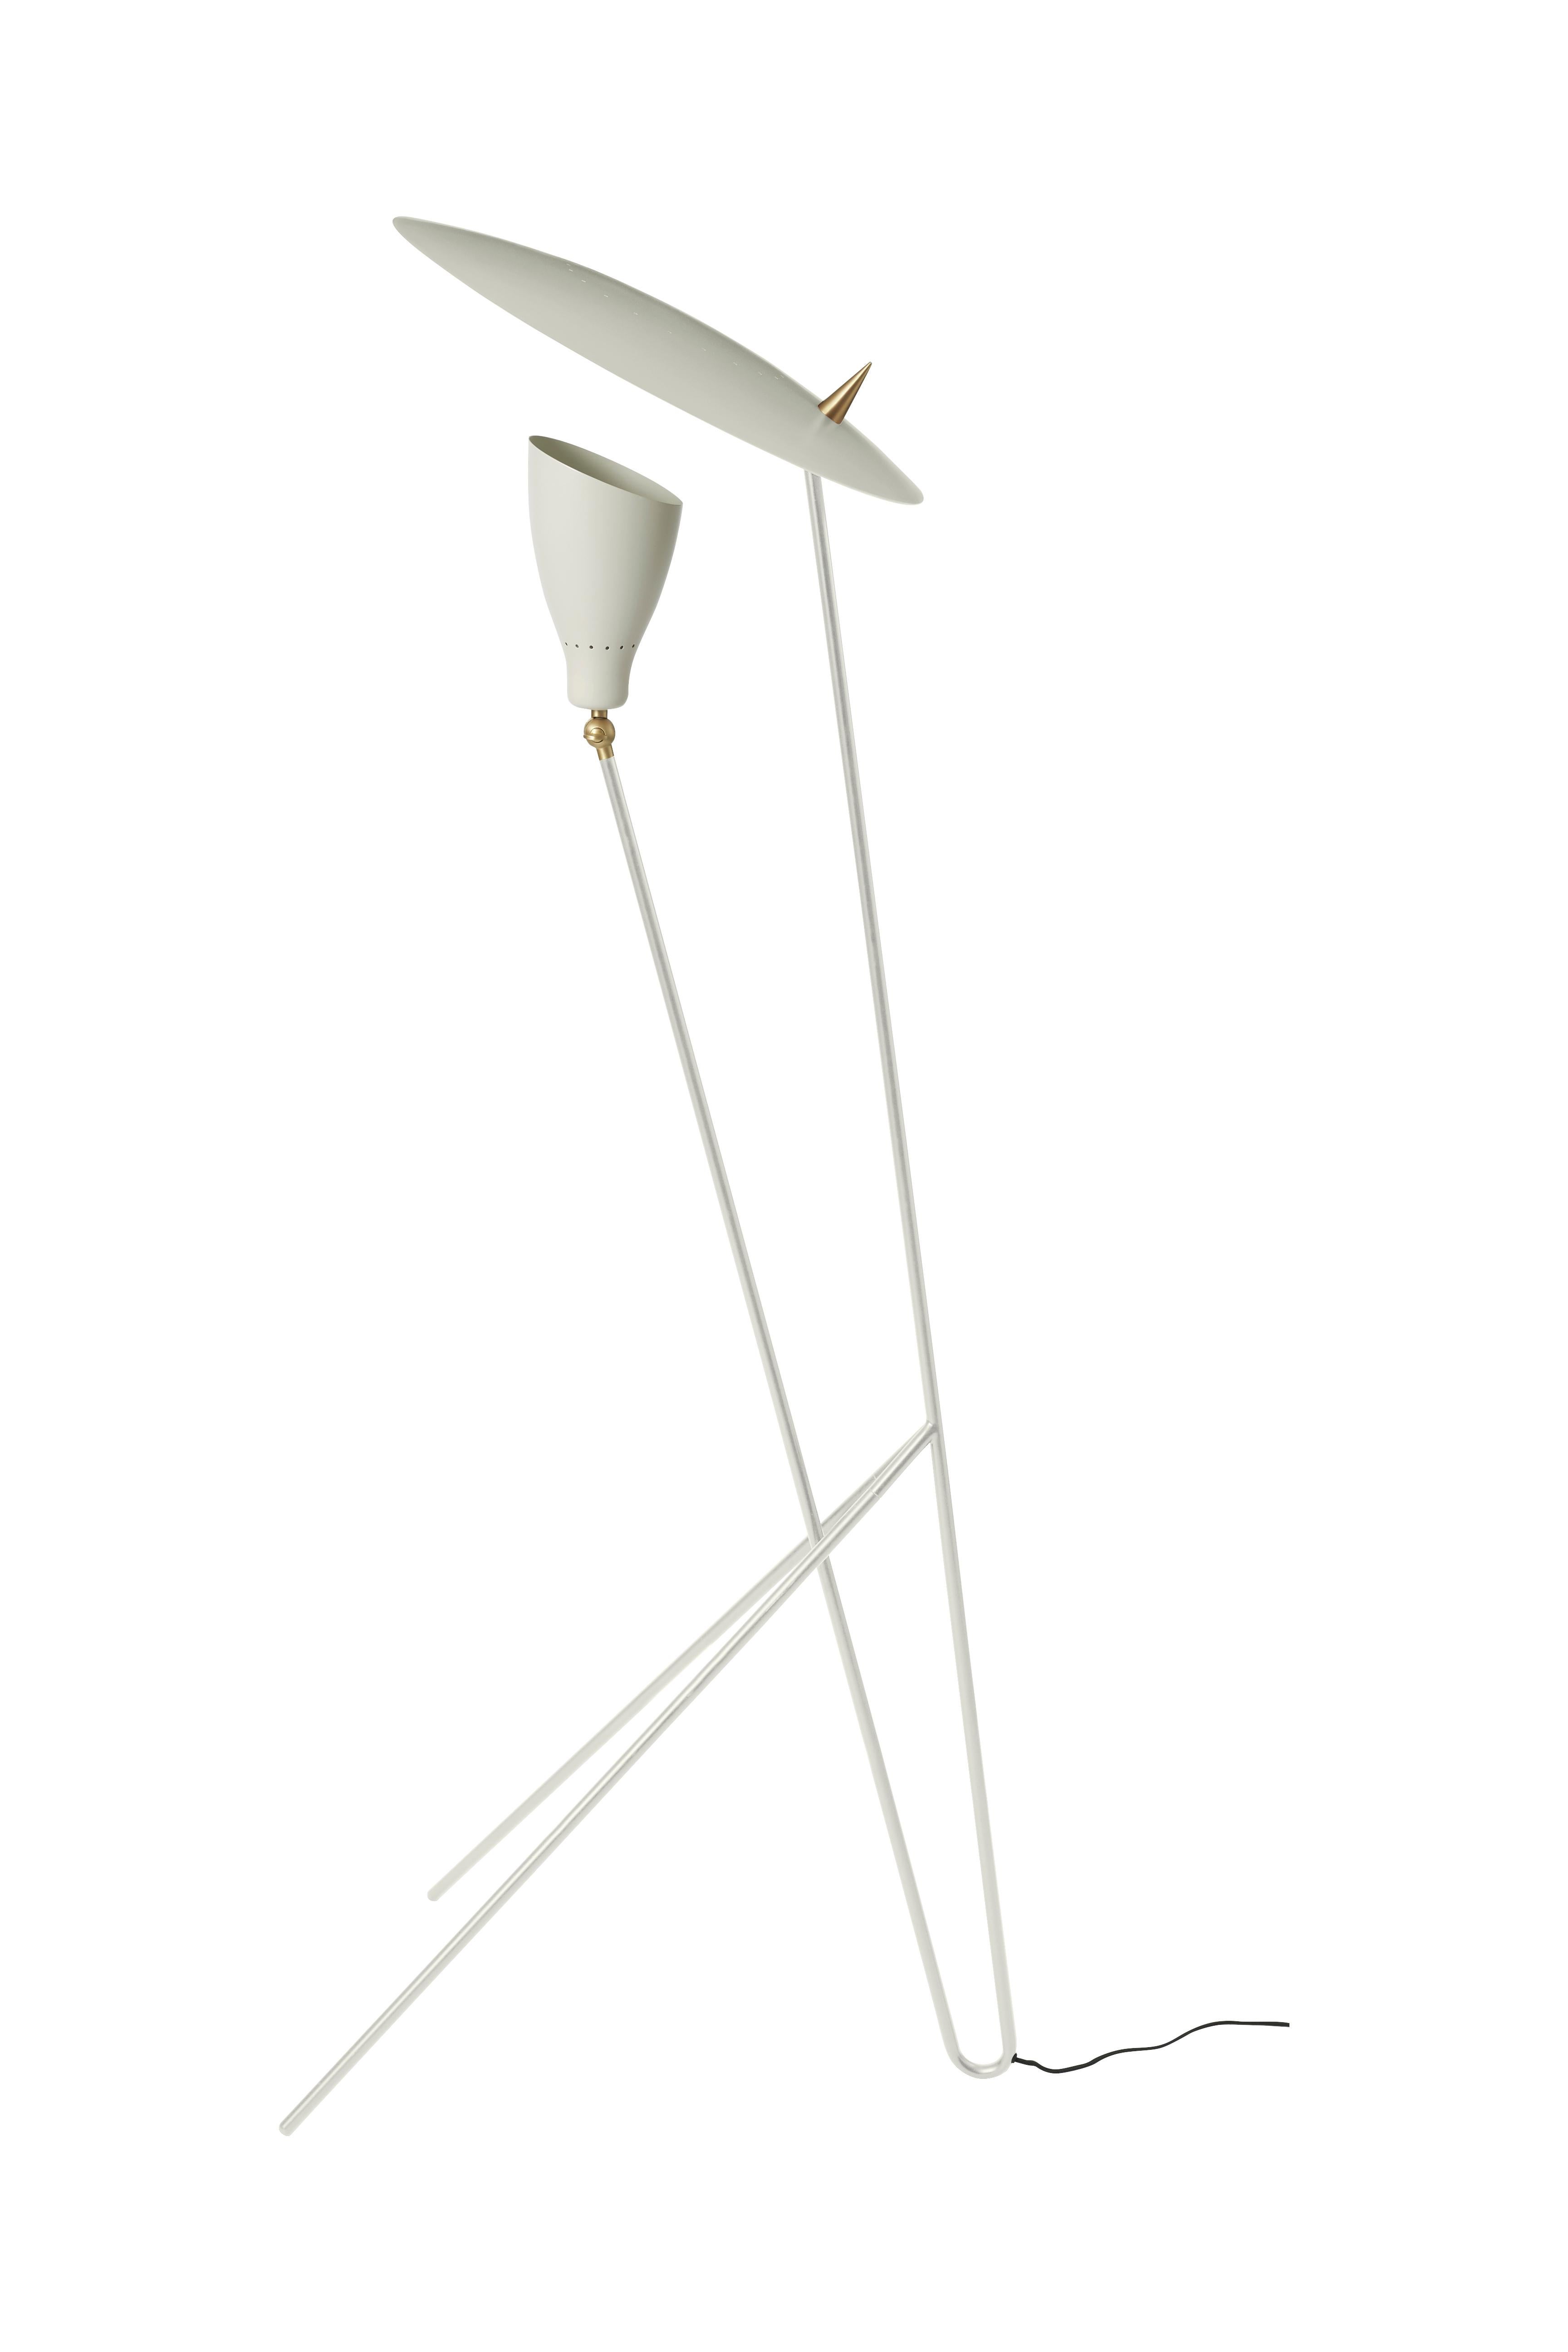 For Sale: White (Warm White) Silhouette Floor Lamp, by Svend Aage Holm-Sørensen from Warm Nordic